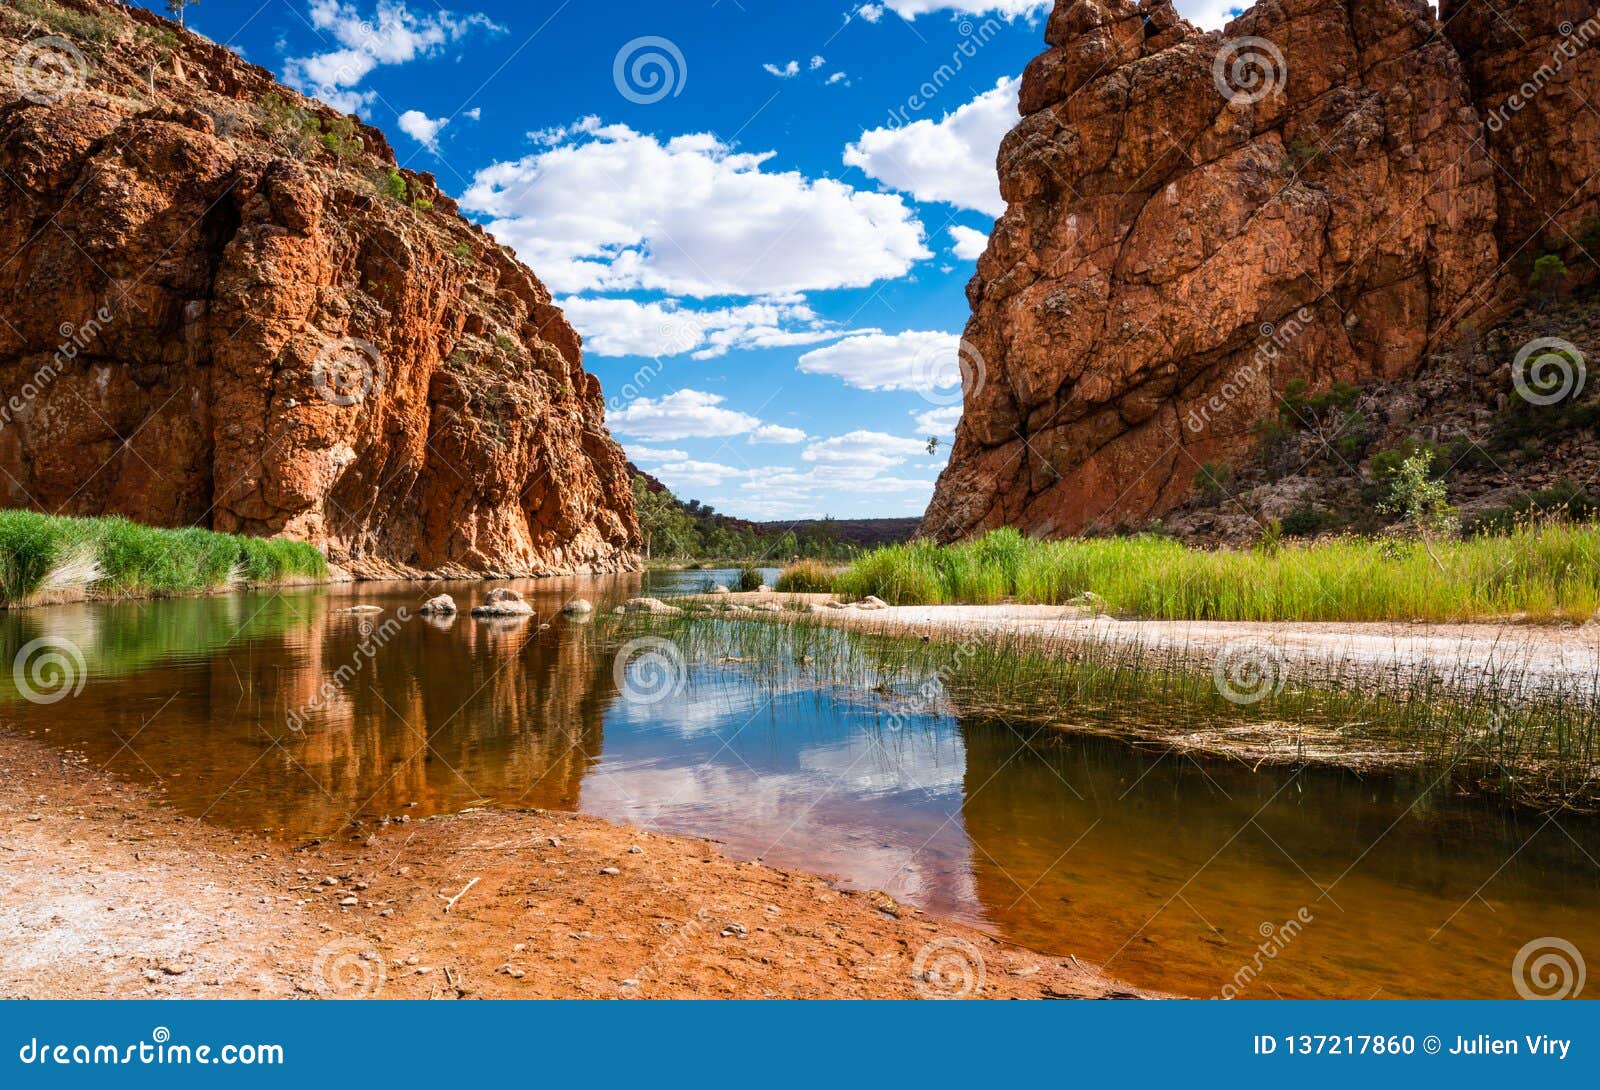 scenic panorama of glen helen gorge in west macdonnell national park in central outback australia